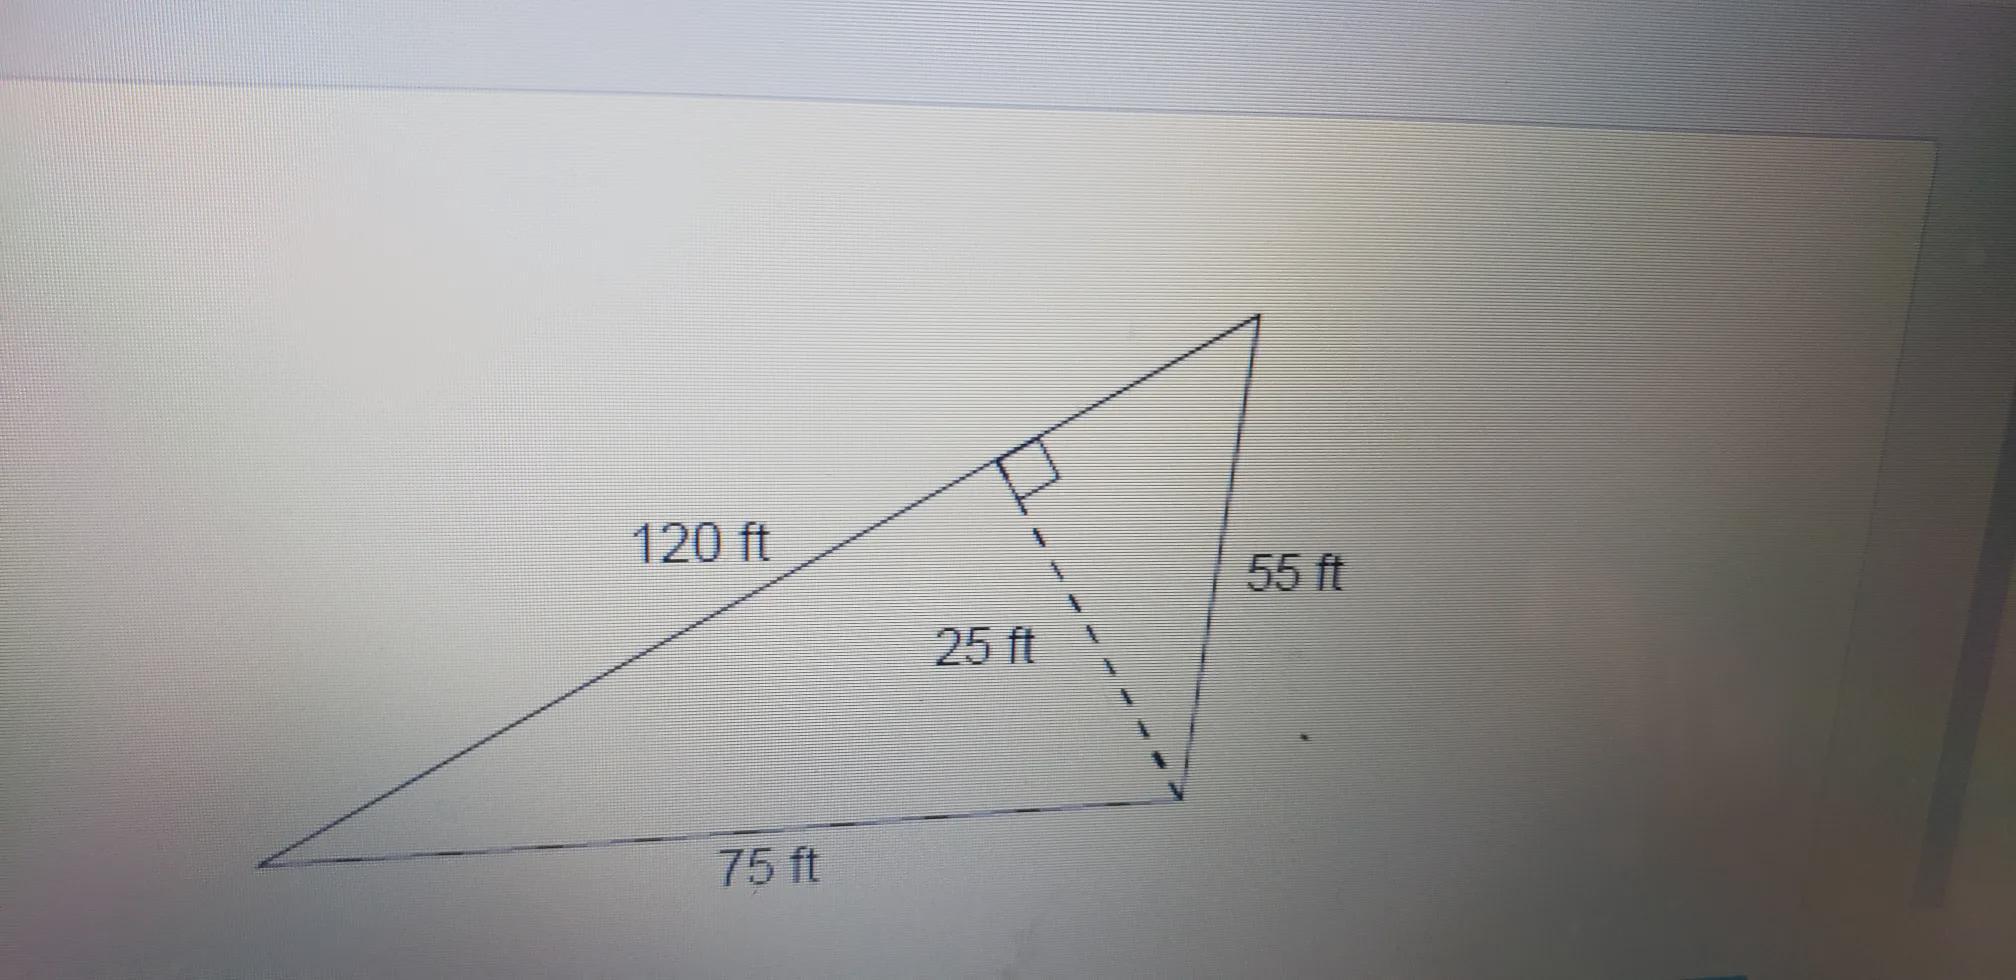 What Is The Area Of This Triangle? 1375 Ft 1500 Ft 3300 Ft 4500 Ft